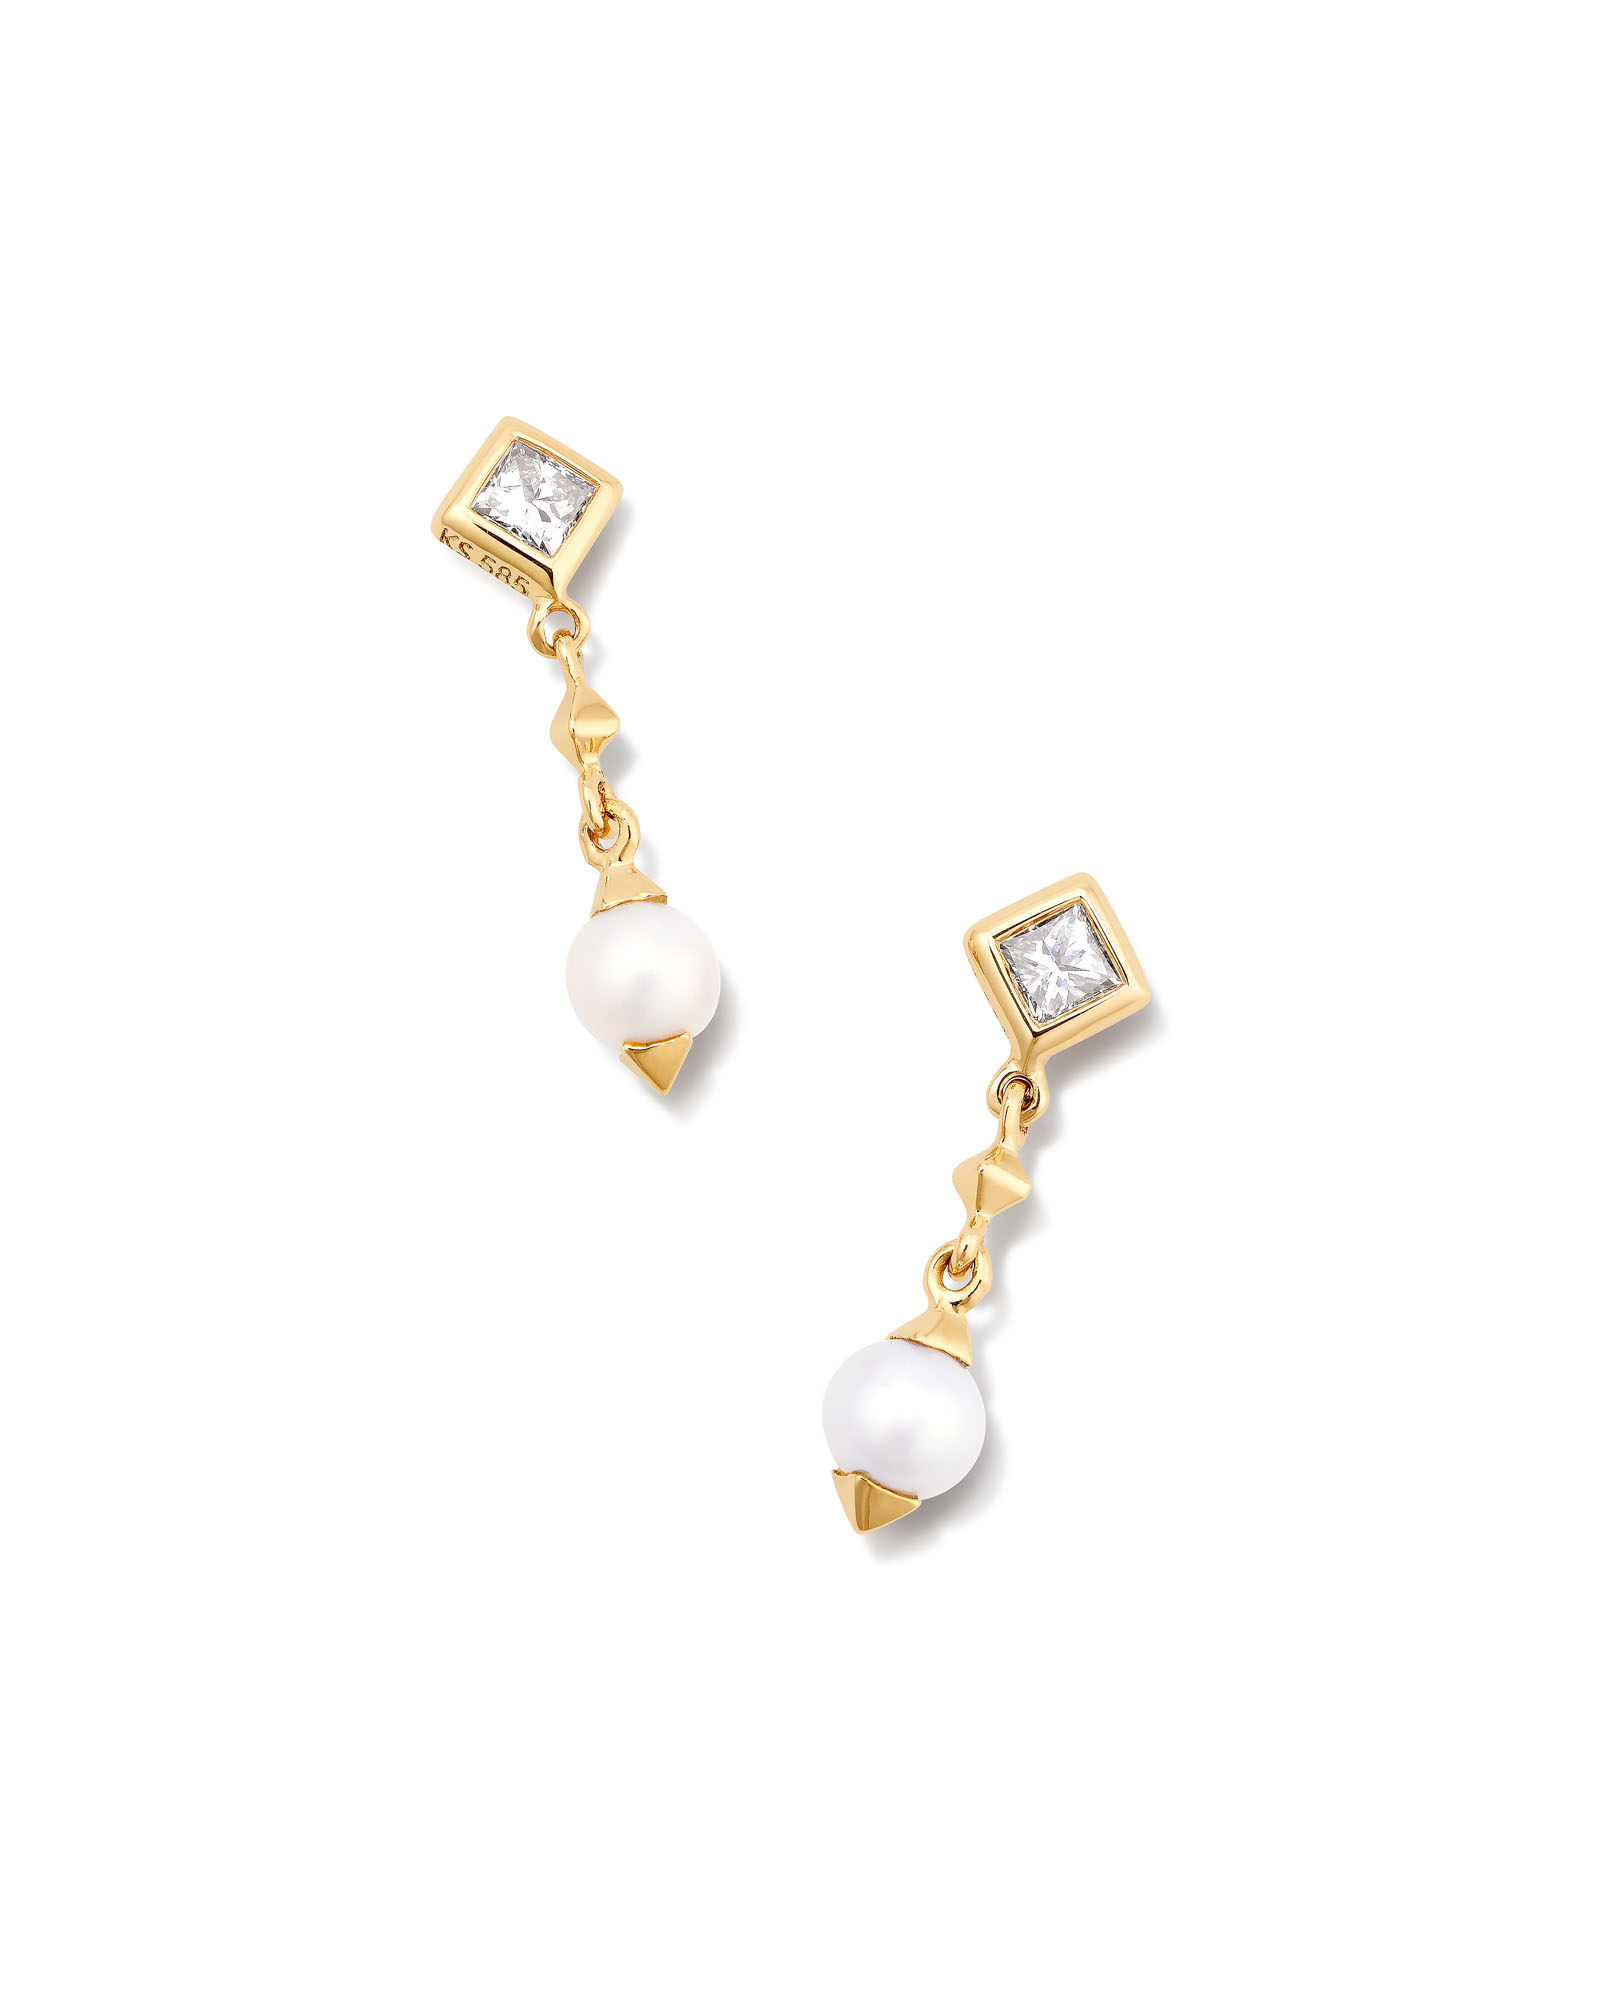 Buy Gold Plated Pearl Drop Earring Online - Accessorize India